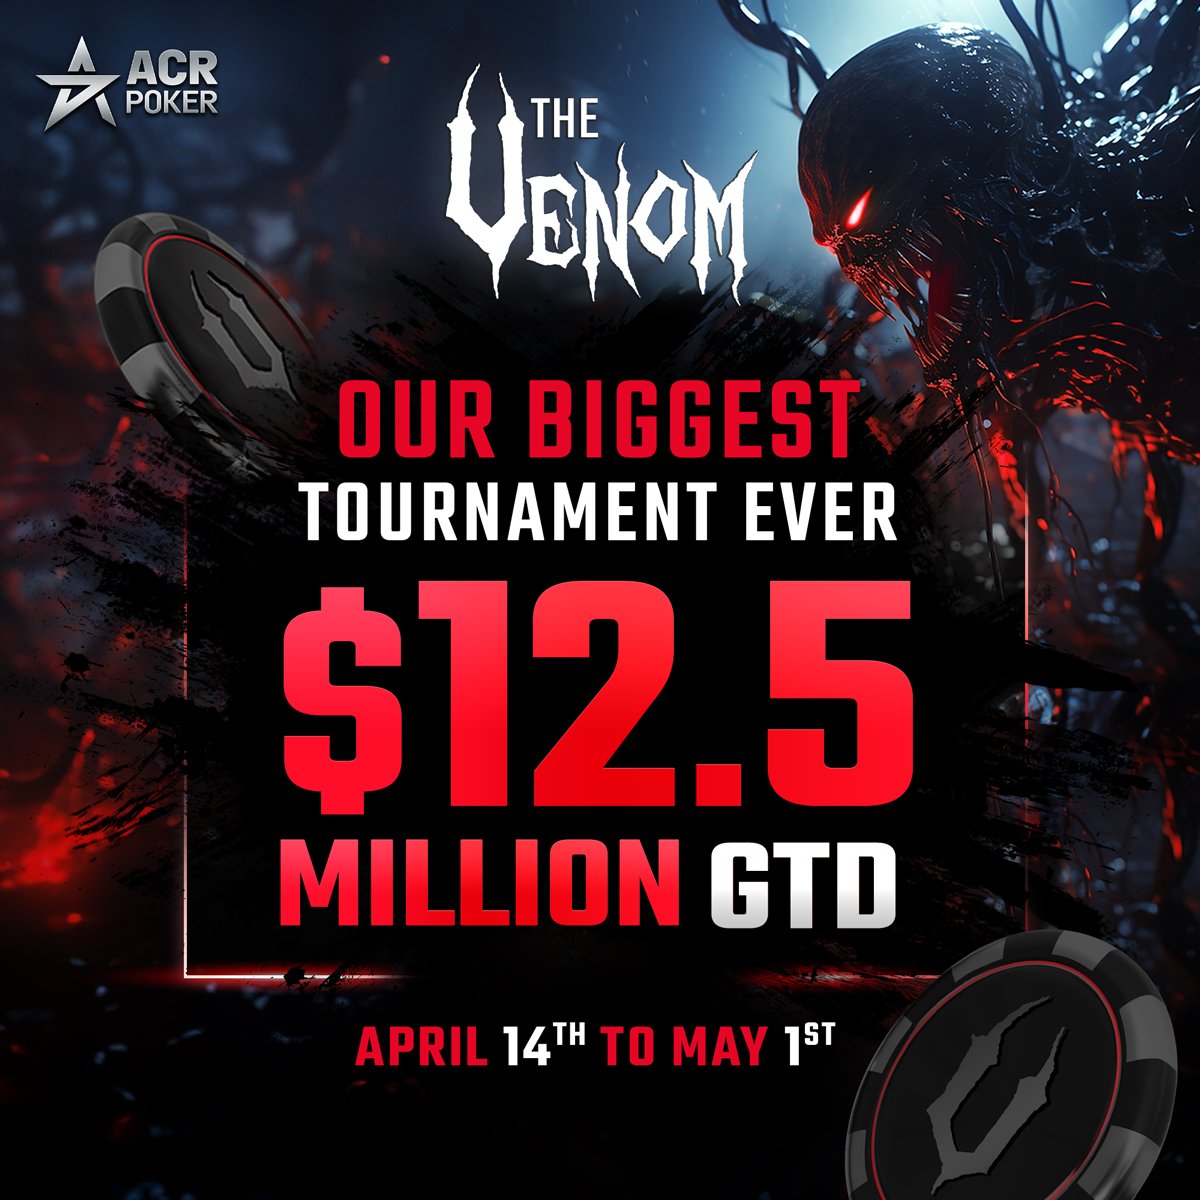 Twitch.tv/dayjahvue The best opportunity today to get my ass in a venom 🪑 16:00 stormers sit n go 2 venom 🎟 on the line playing the biggest gtd tourney on ACR 🥂 watch your favorite stormer lock up their seat, and let's have dayjahvu ONE TIME~ @ACR_POKER @ACRSTormers ❤️